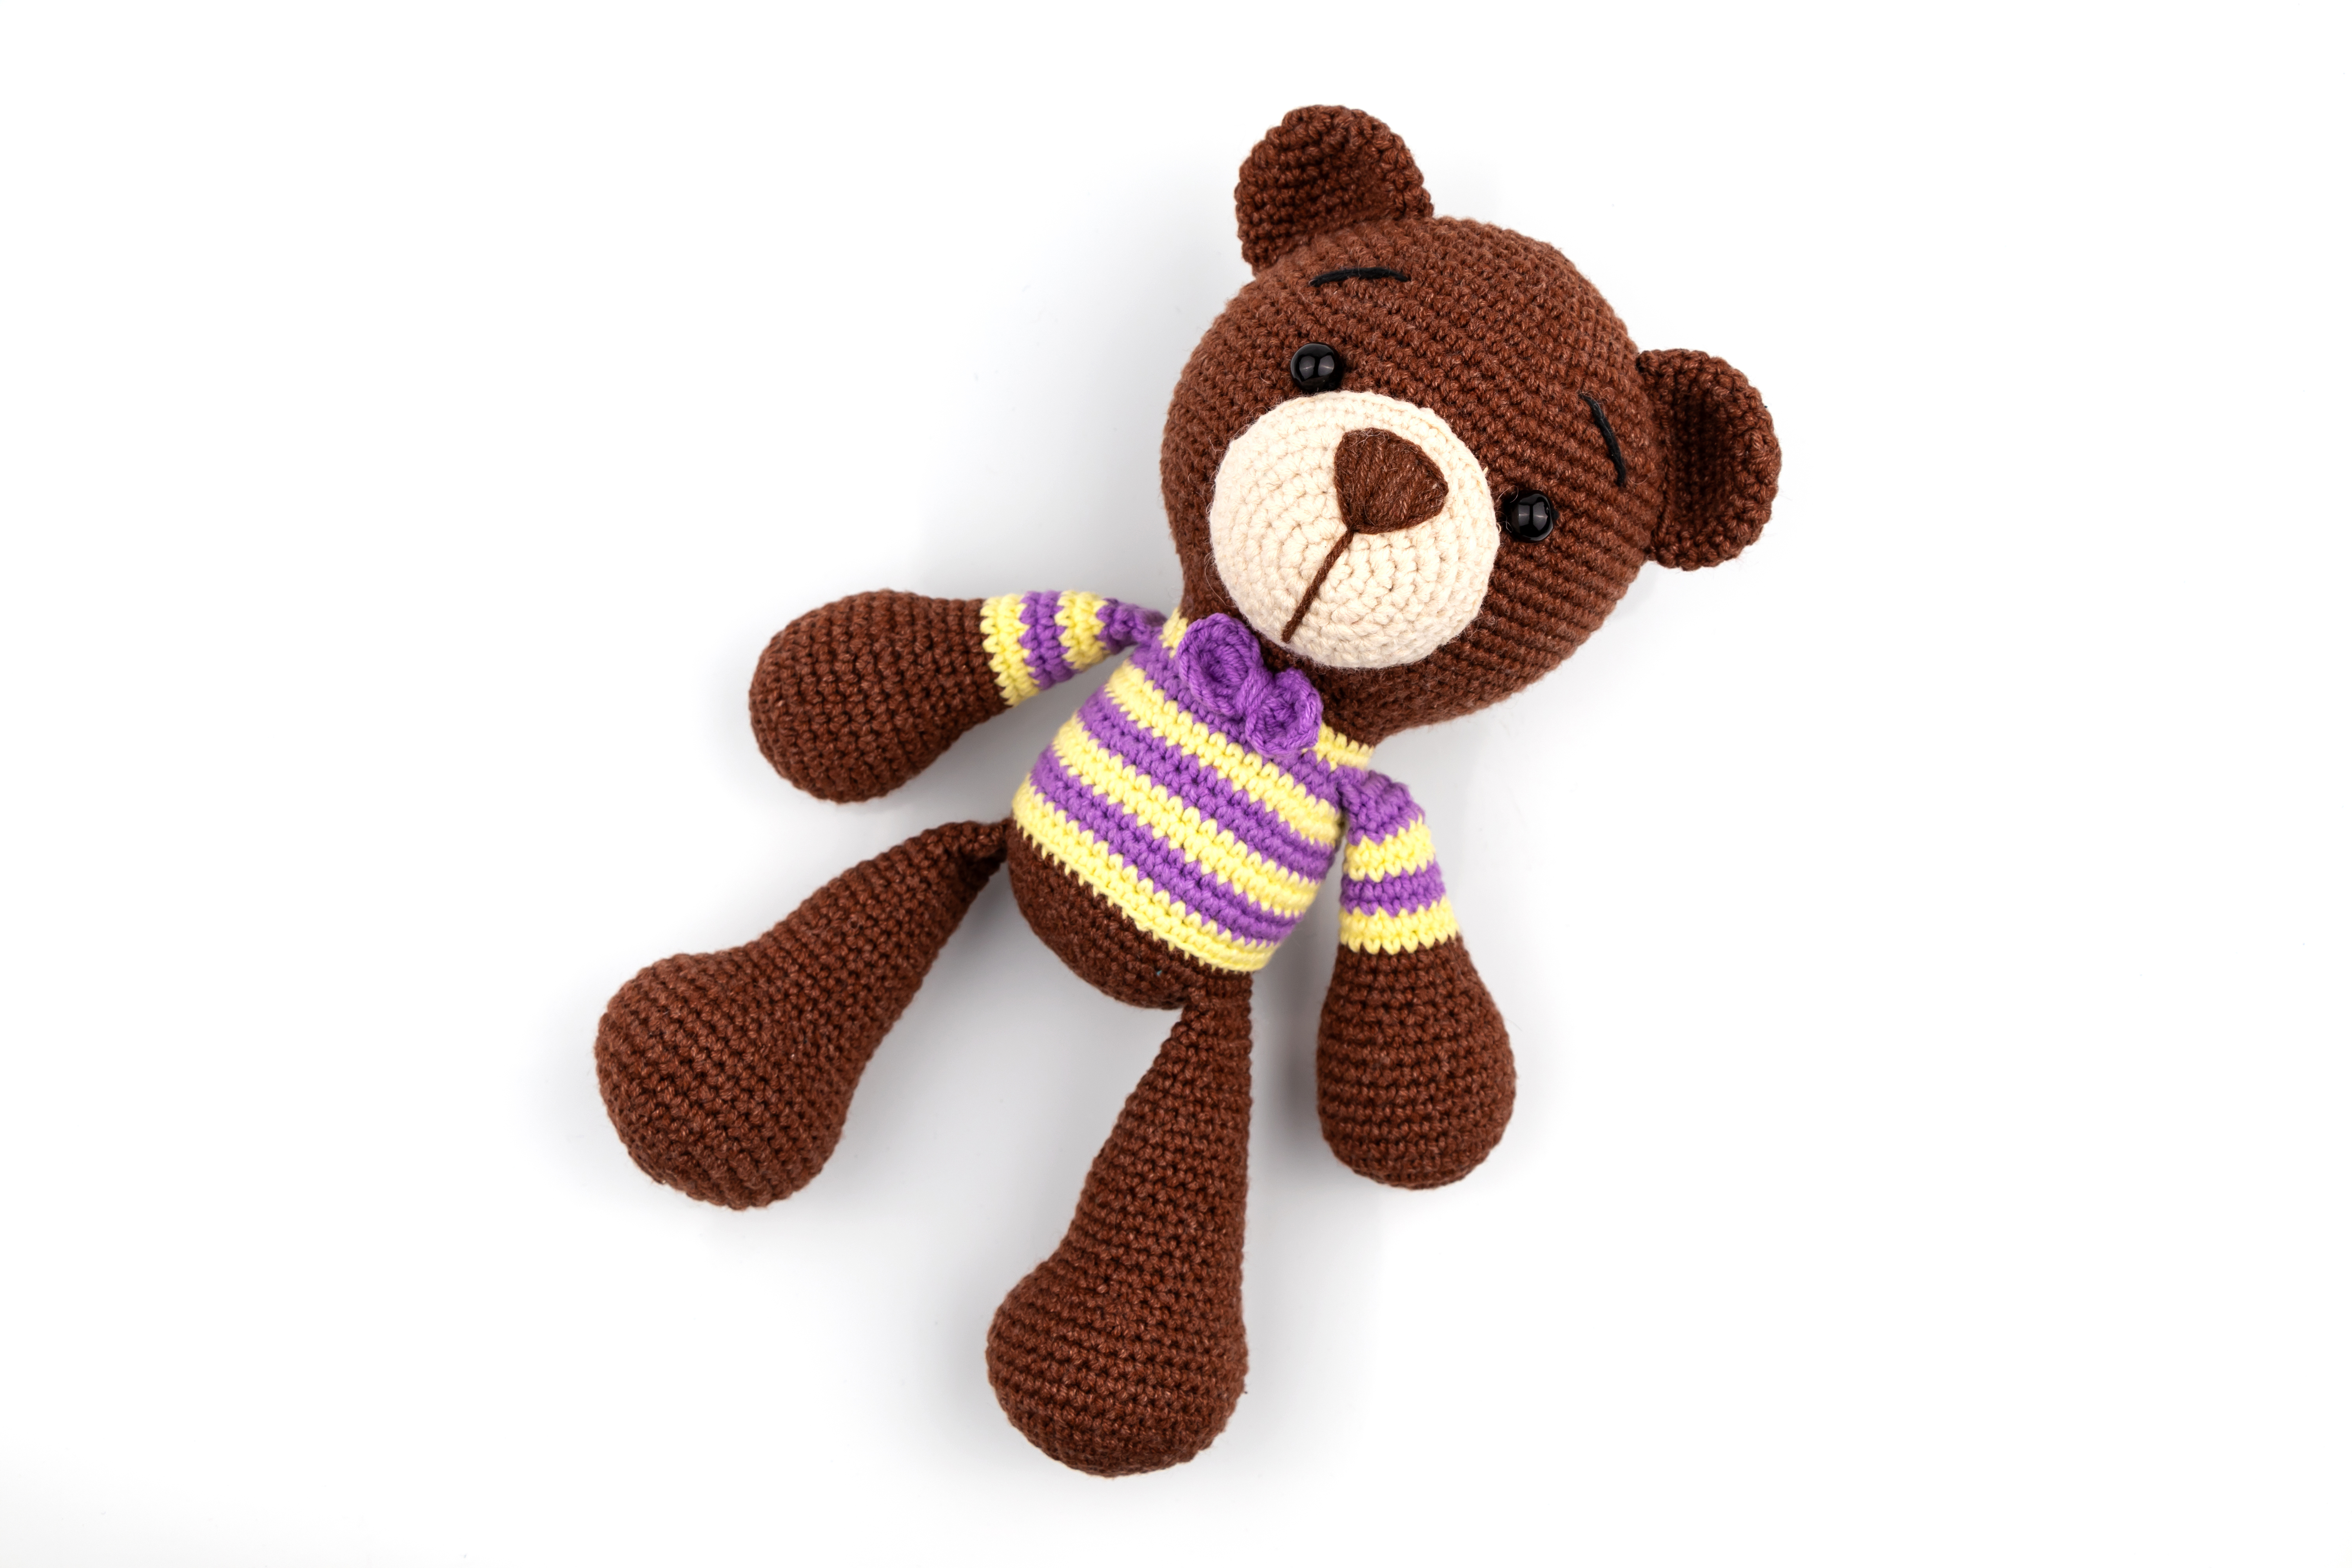 Funny handmade knitted toy | Source: Shutterstock